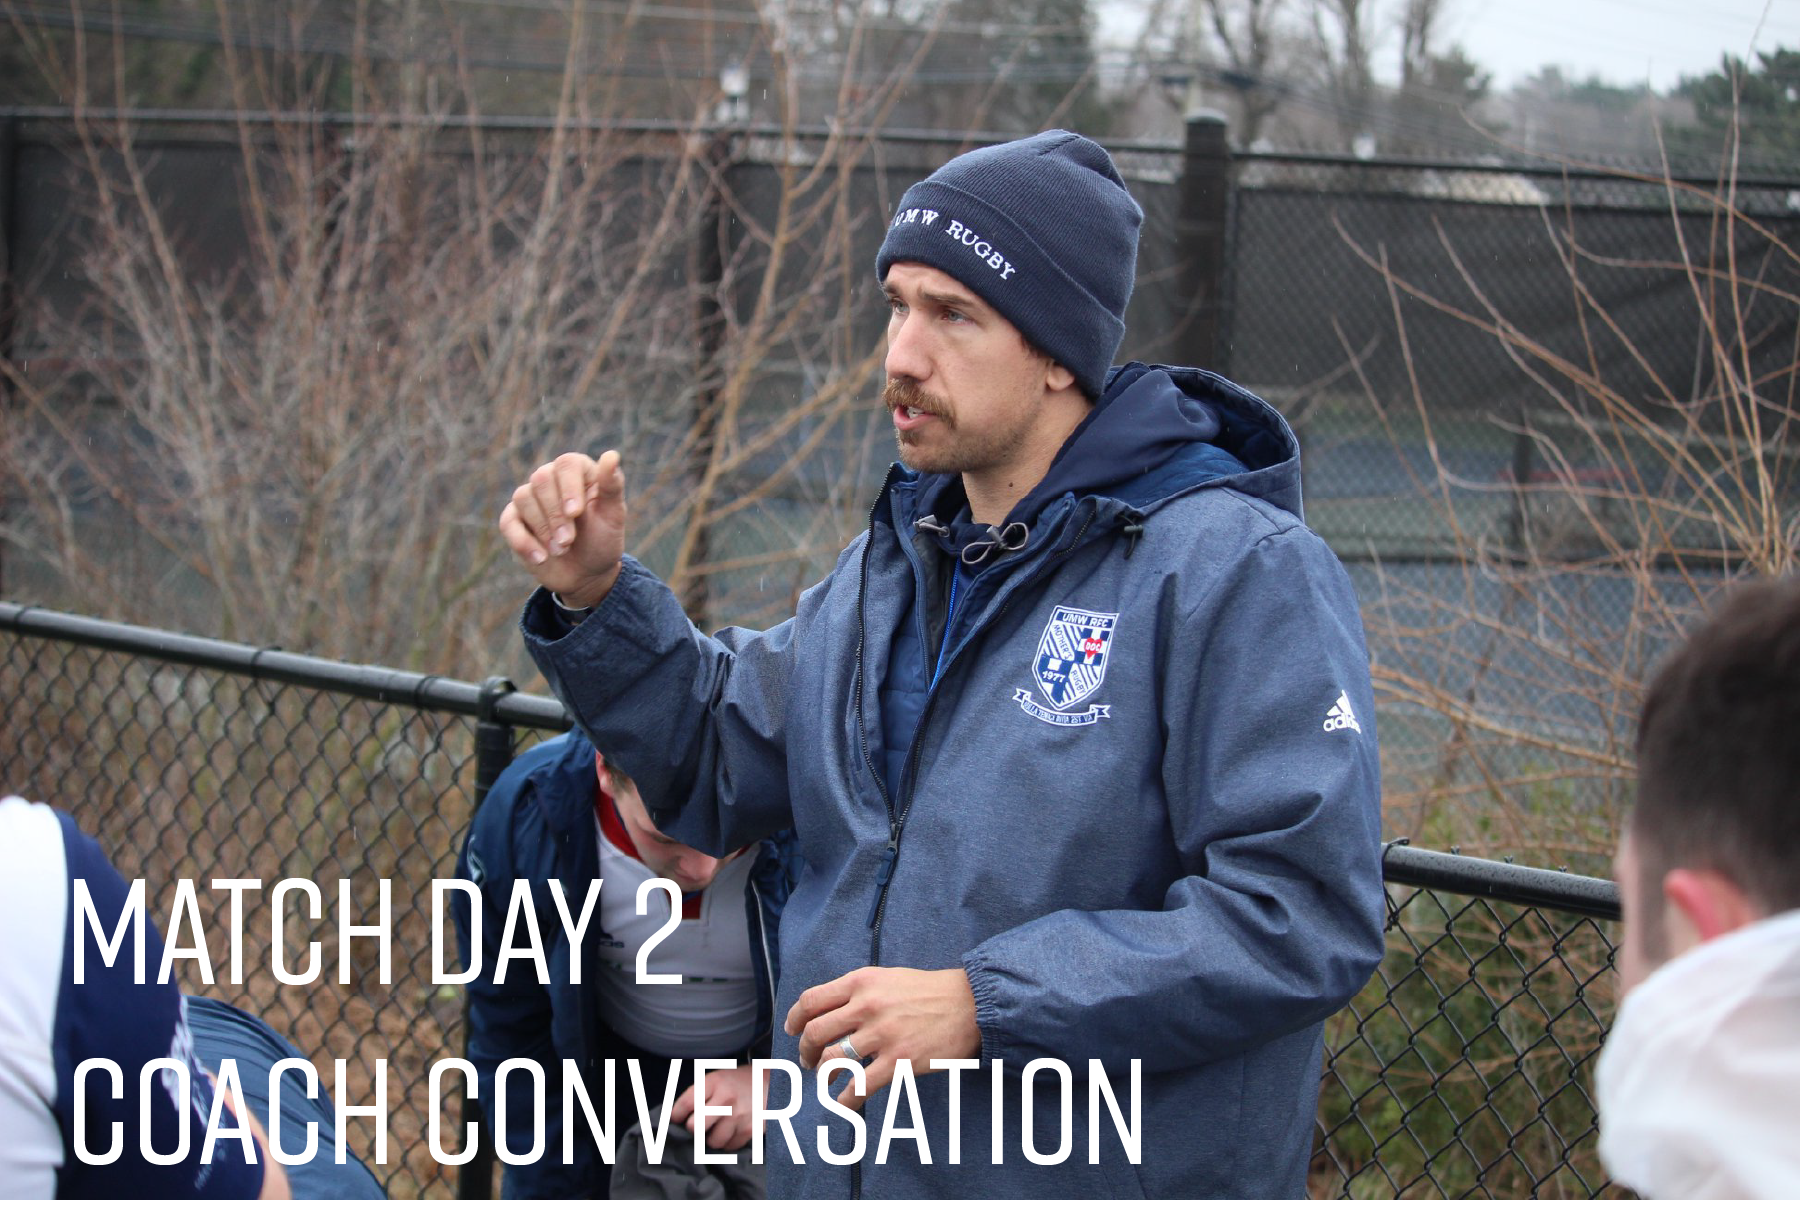 Post-Match Day 2 Conversation with Head Coach Tyler Stephens – Mothers